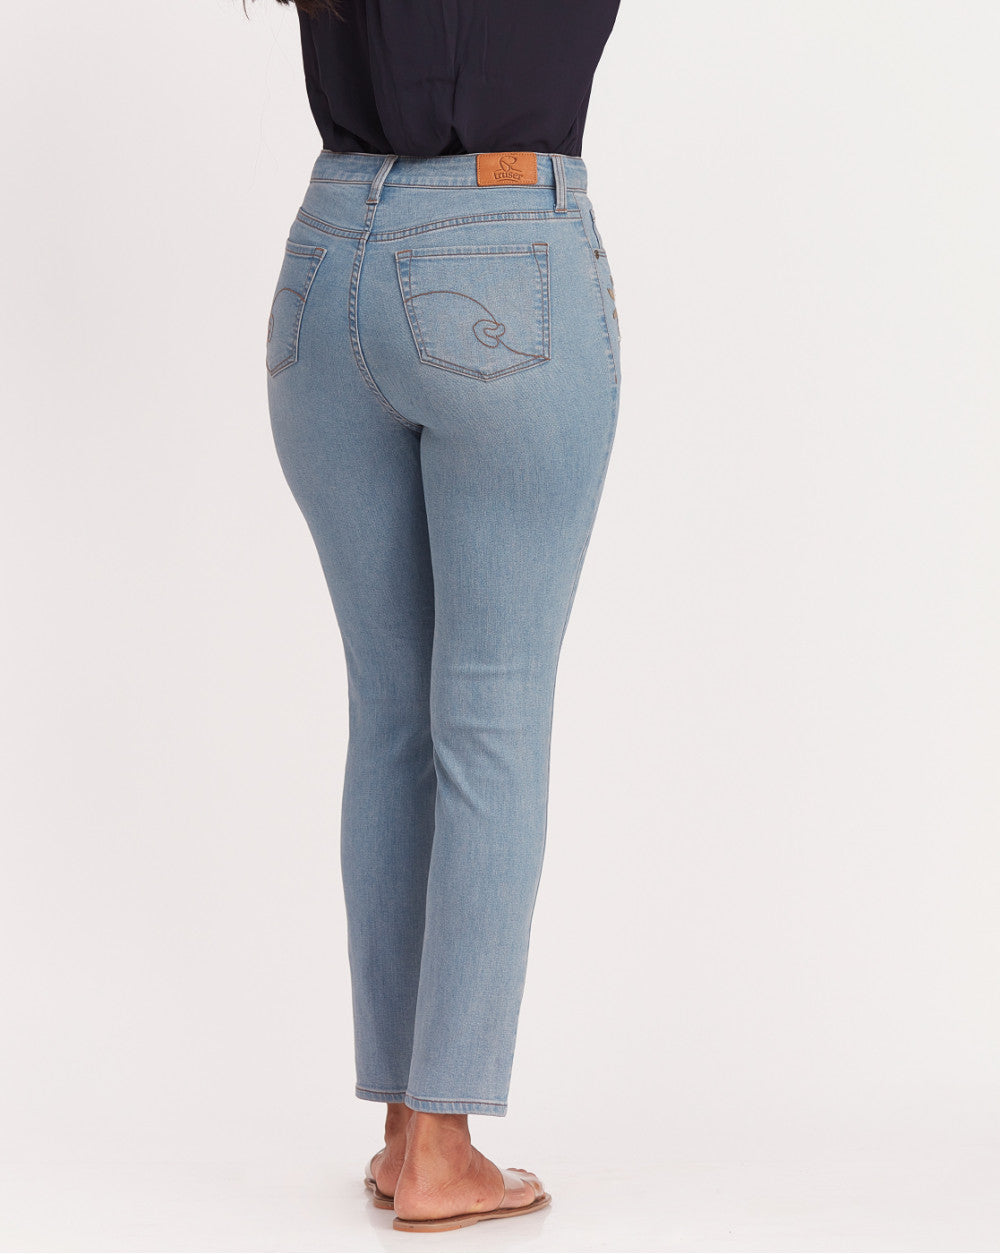 Skinny Fit, Floral Embroidered Jeans - Vapour Blue